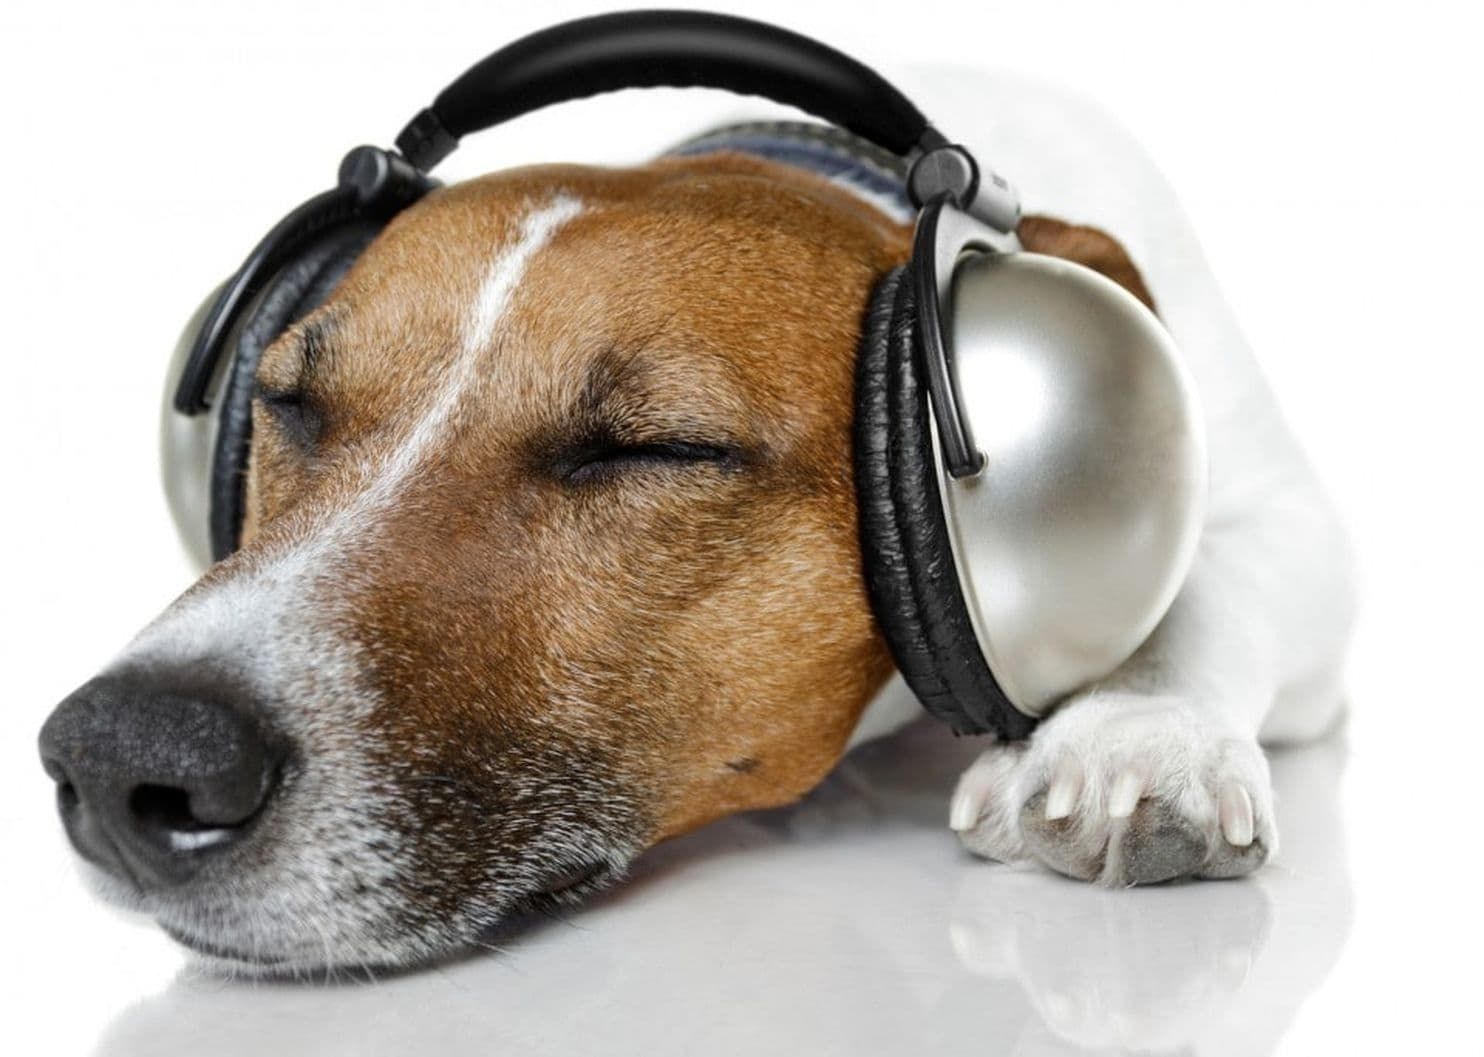 Dog listening to canine lullabies